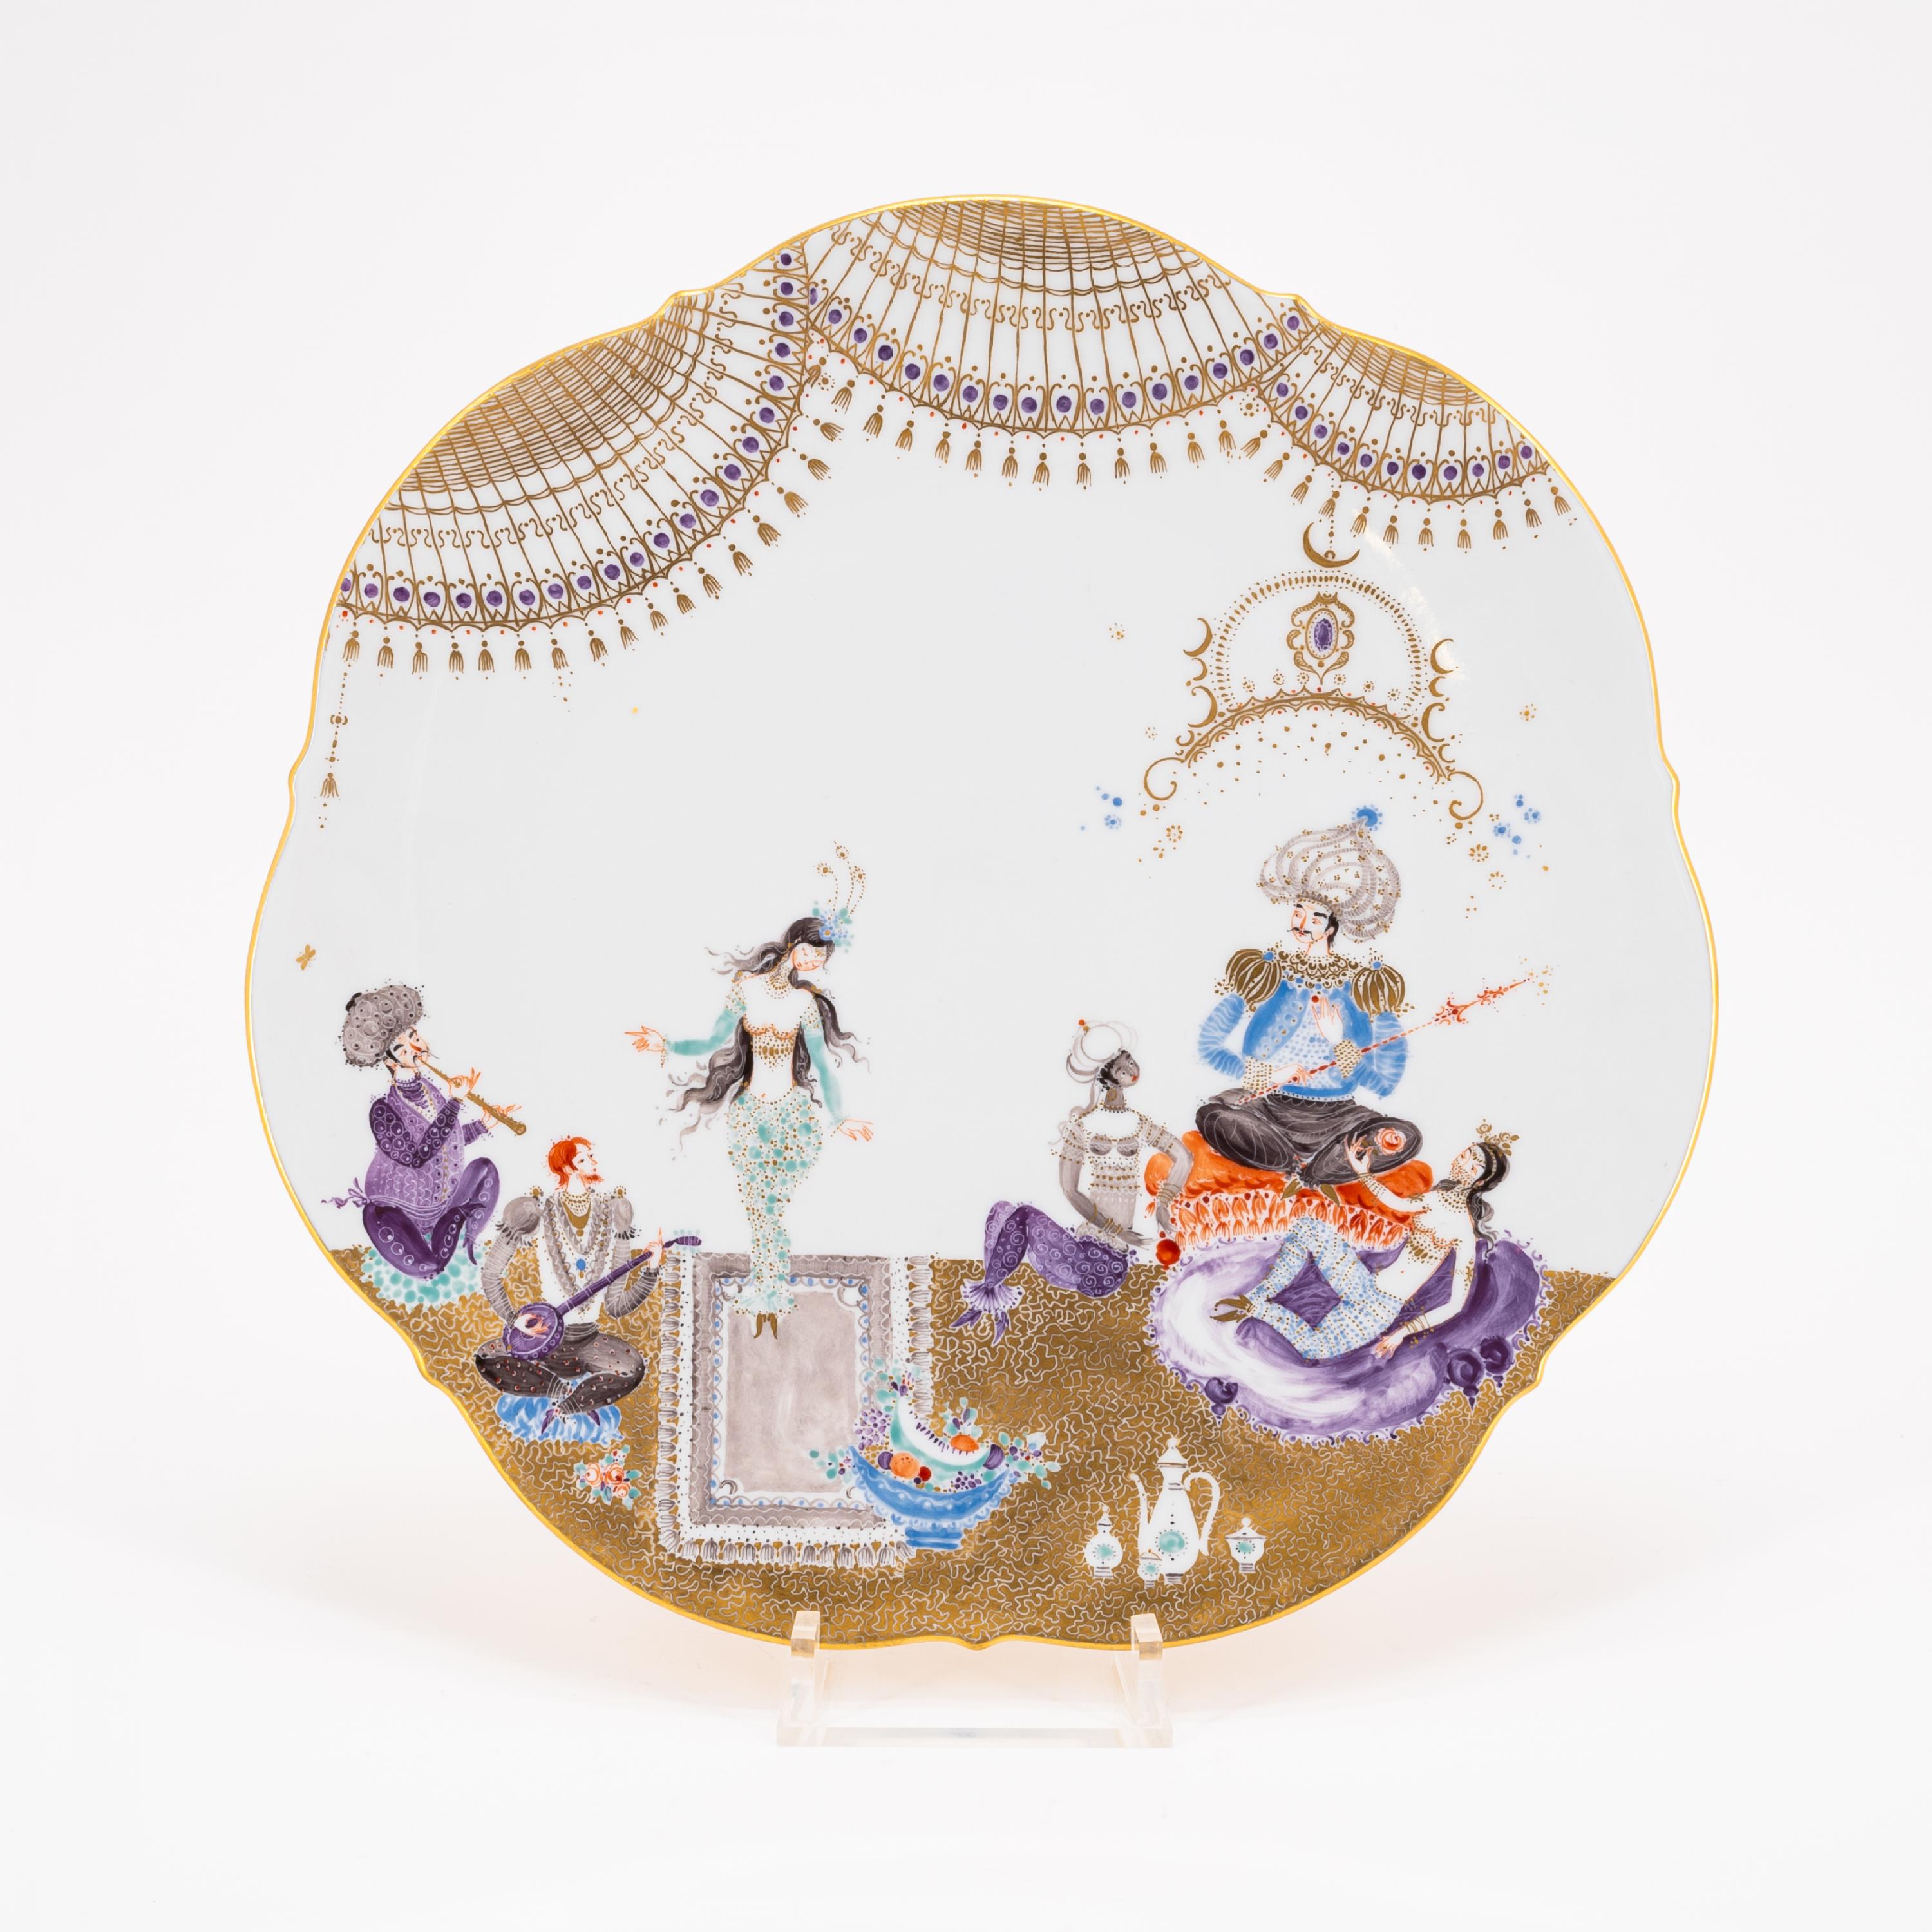 LARGE PORCELAIN COFFEE SERVICE WITH '1001 NIGHTS' DECOR FOR 12 PEOPLE - Image 14 of 19